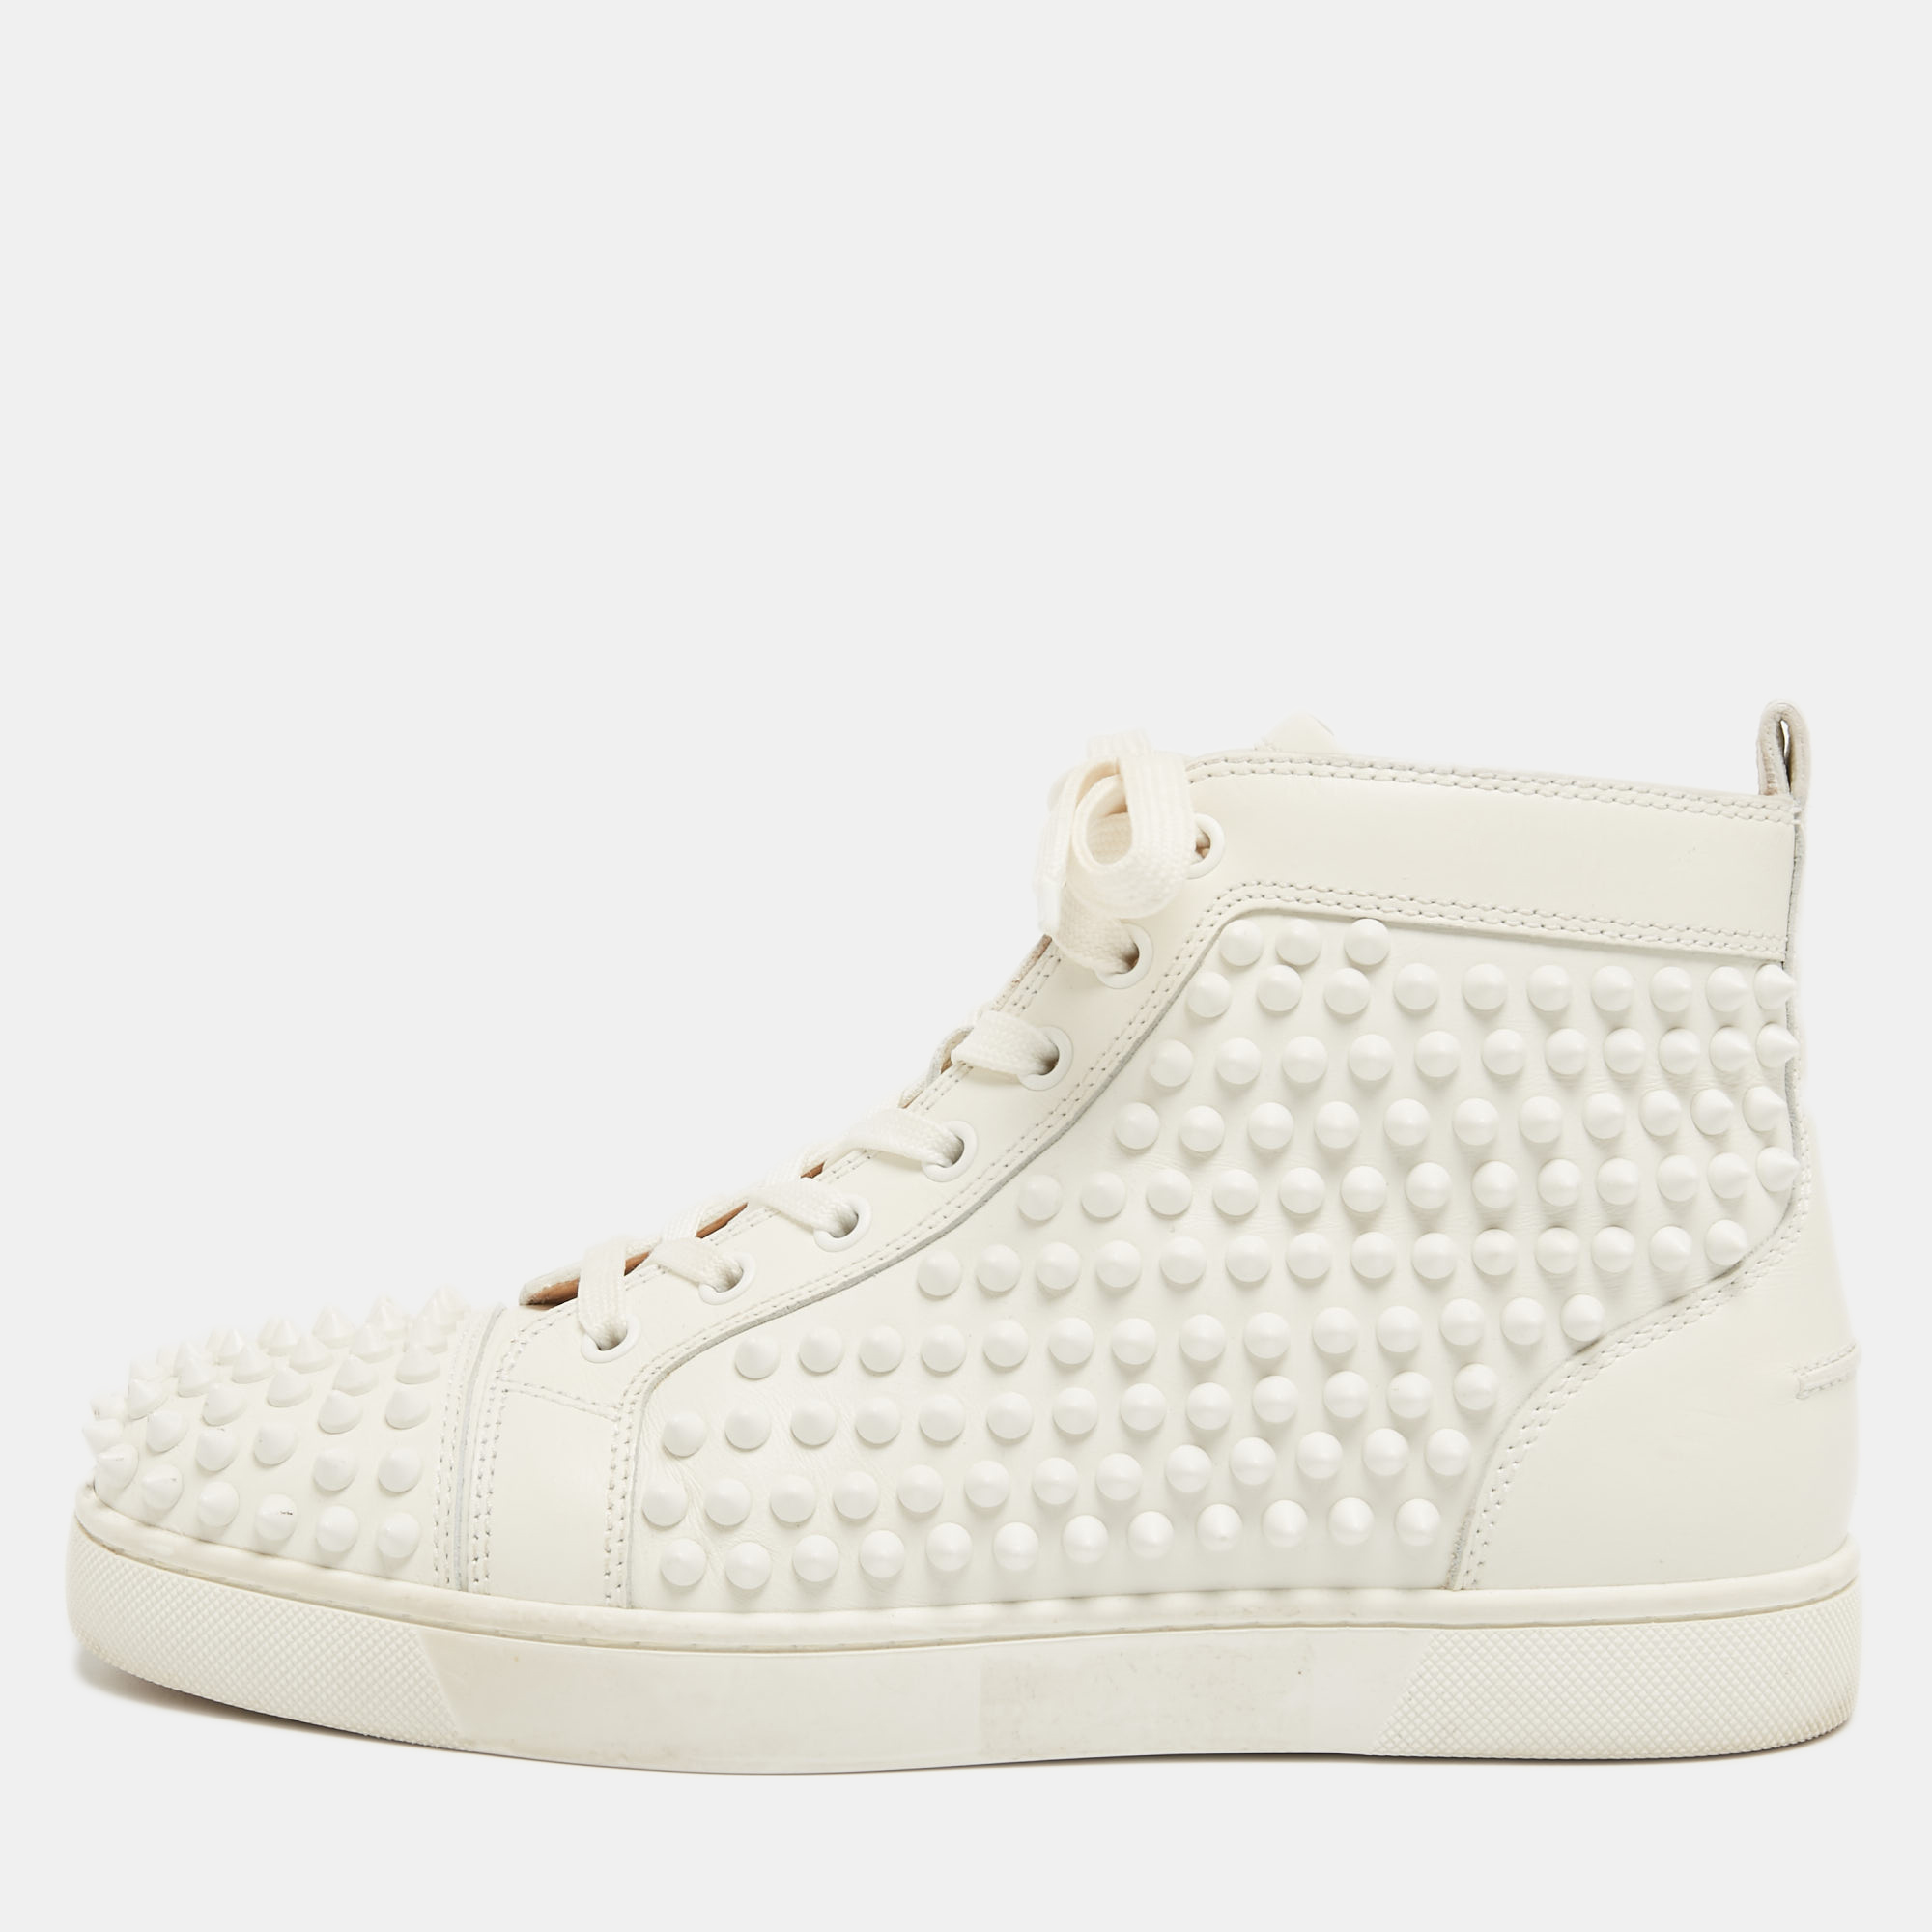 Coming in a classic silhouette these designer sneakers are a seamless combination of luxury comfort and style. These sneakers are finished with signature details and comfortable insoles.